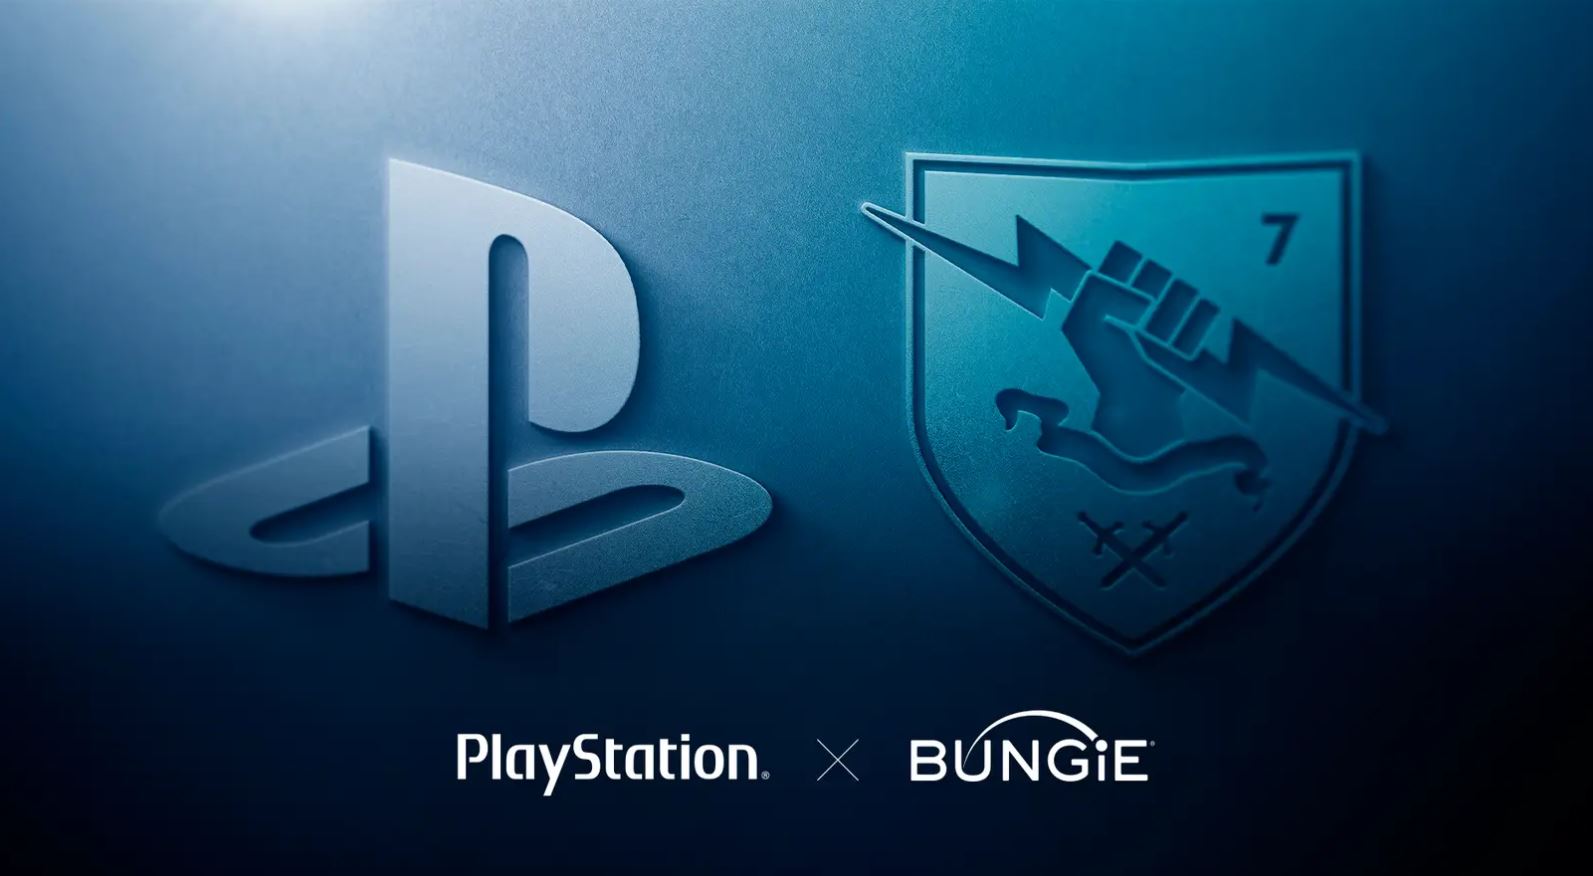 image The possible reasons for Sony’s multibillion dollar acquisition of Bungie